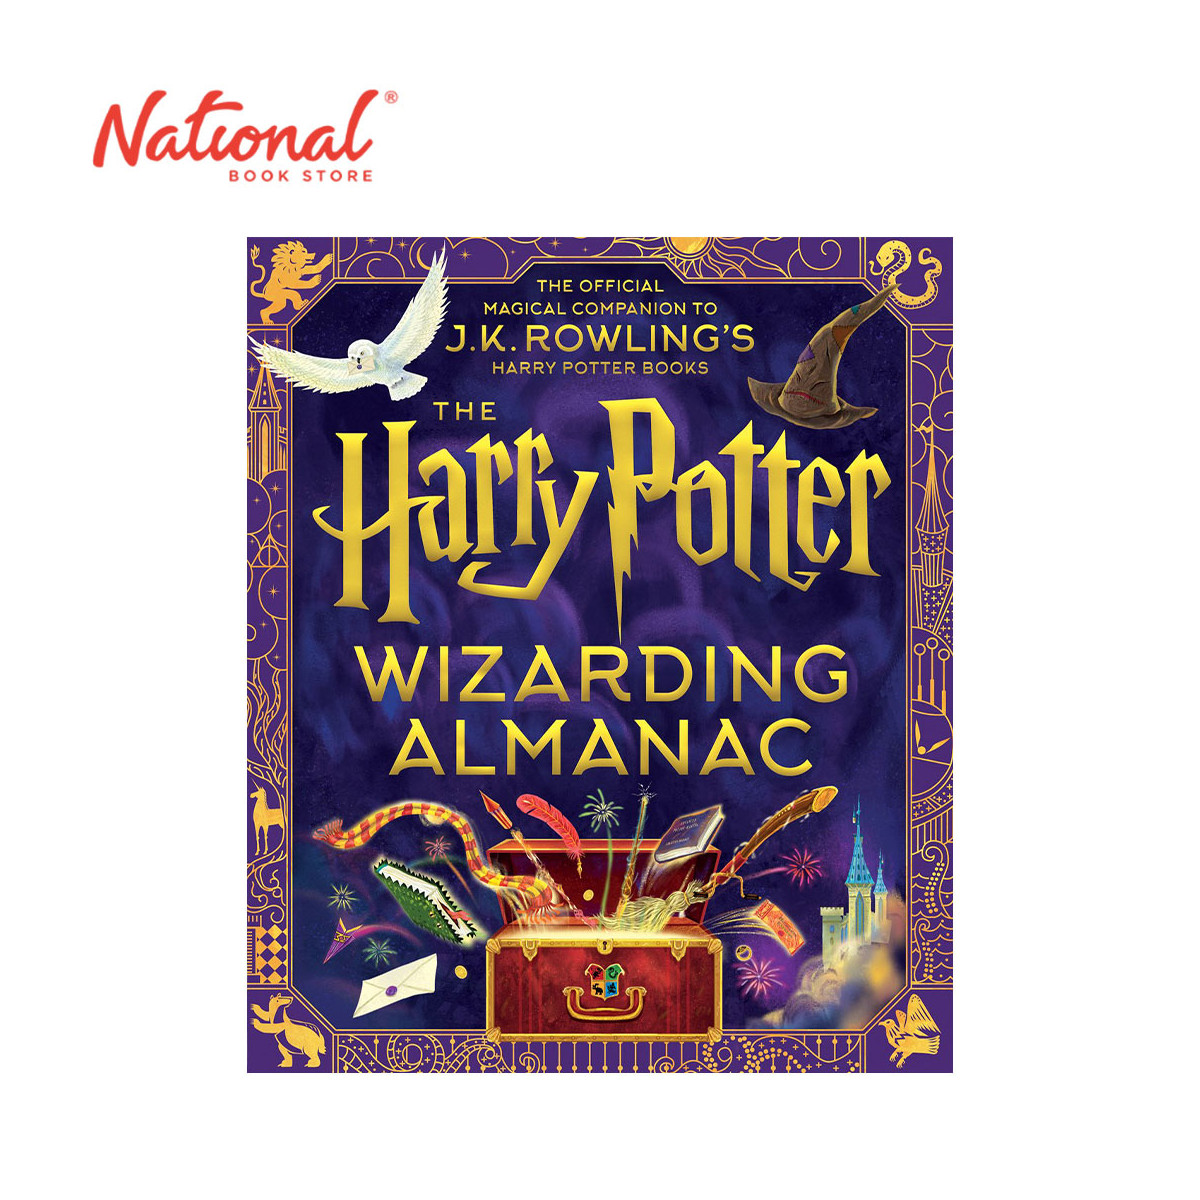 The Harry Potter Wizarding Almanac By J.K Rowling - Hardcover - Books for Kids - Sci-Fi, Fantasy